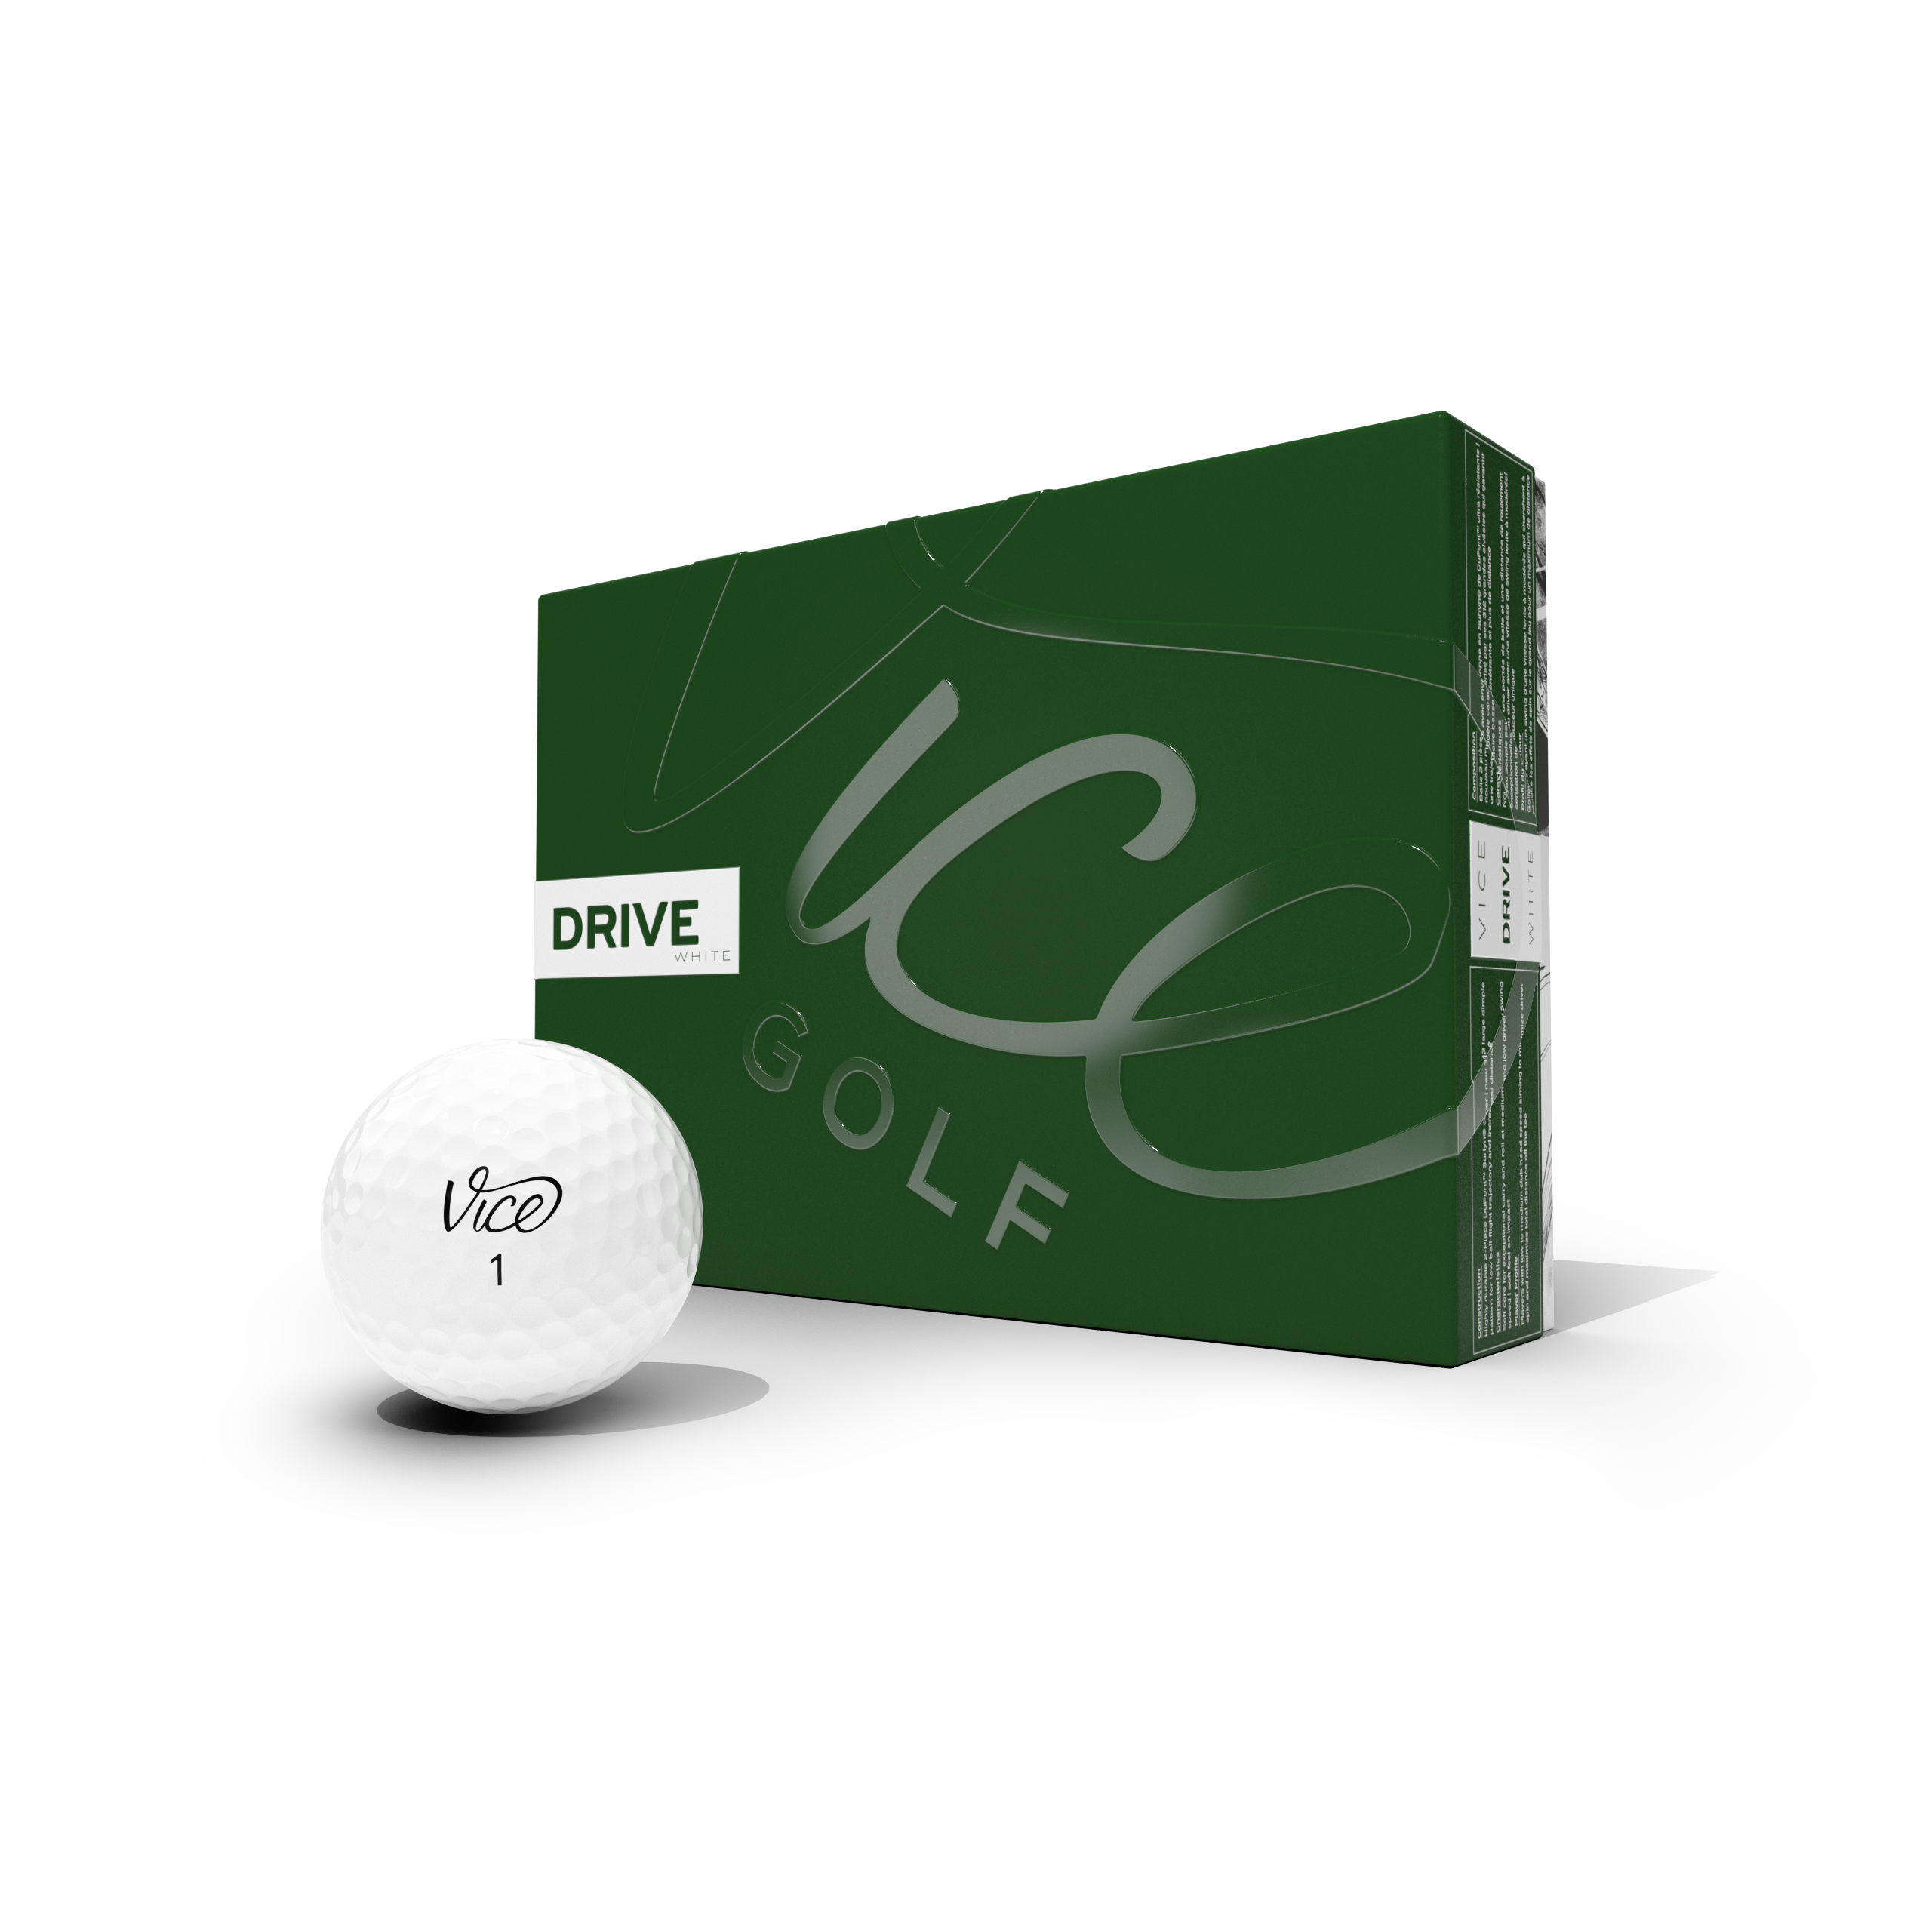 Vice Golf launches its 2020 golf ball lineup 